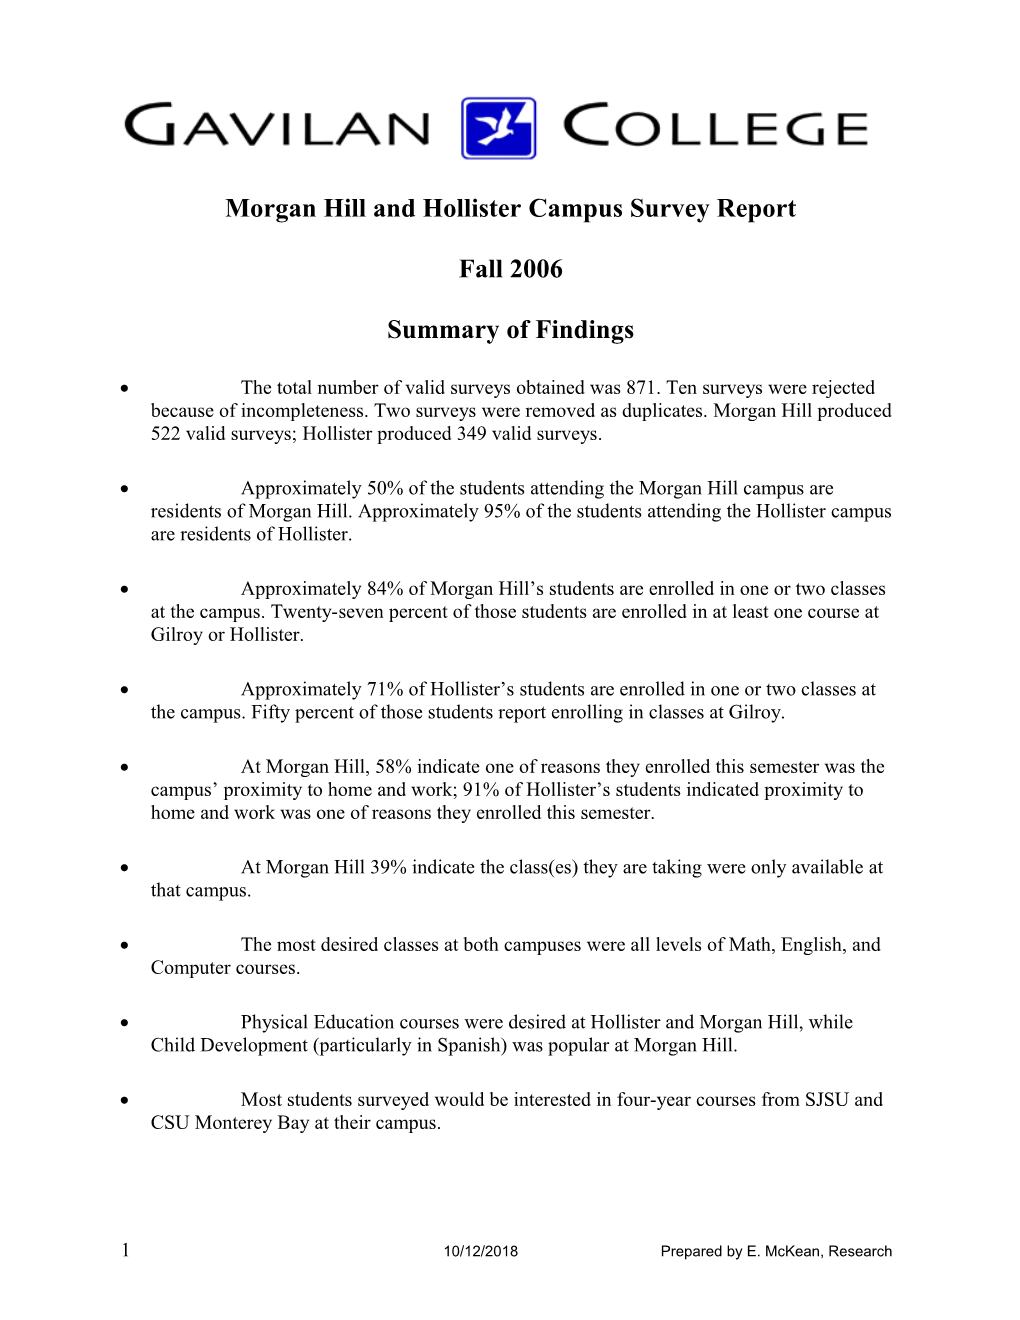 Morgan Hill and Hollister Campus Survey Report